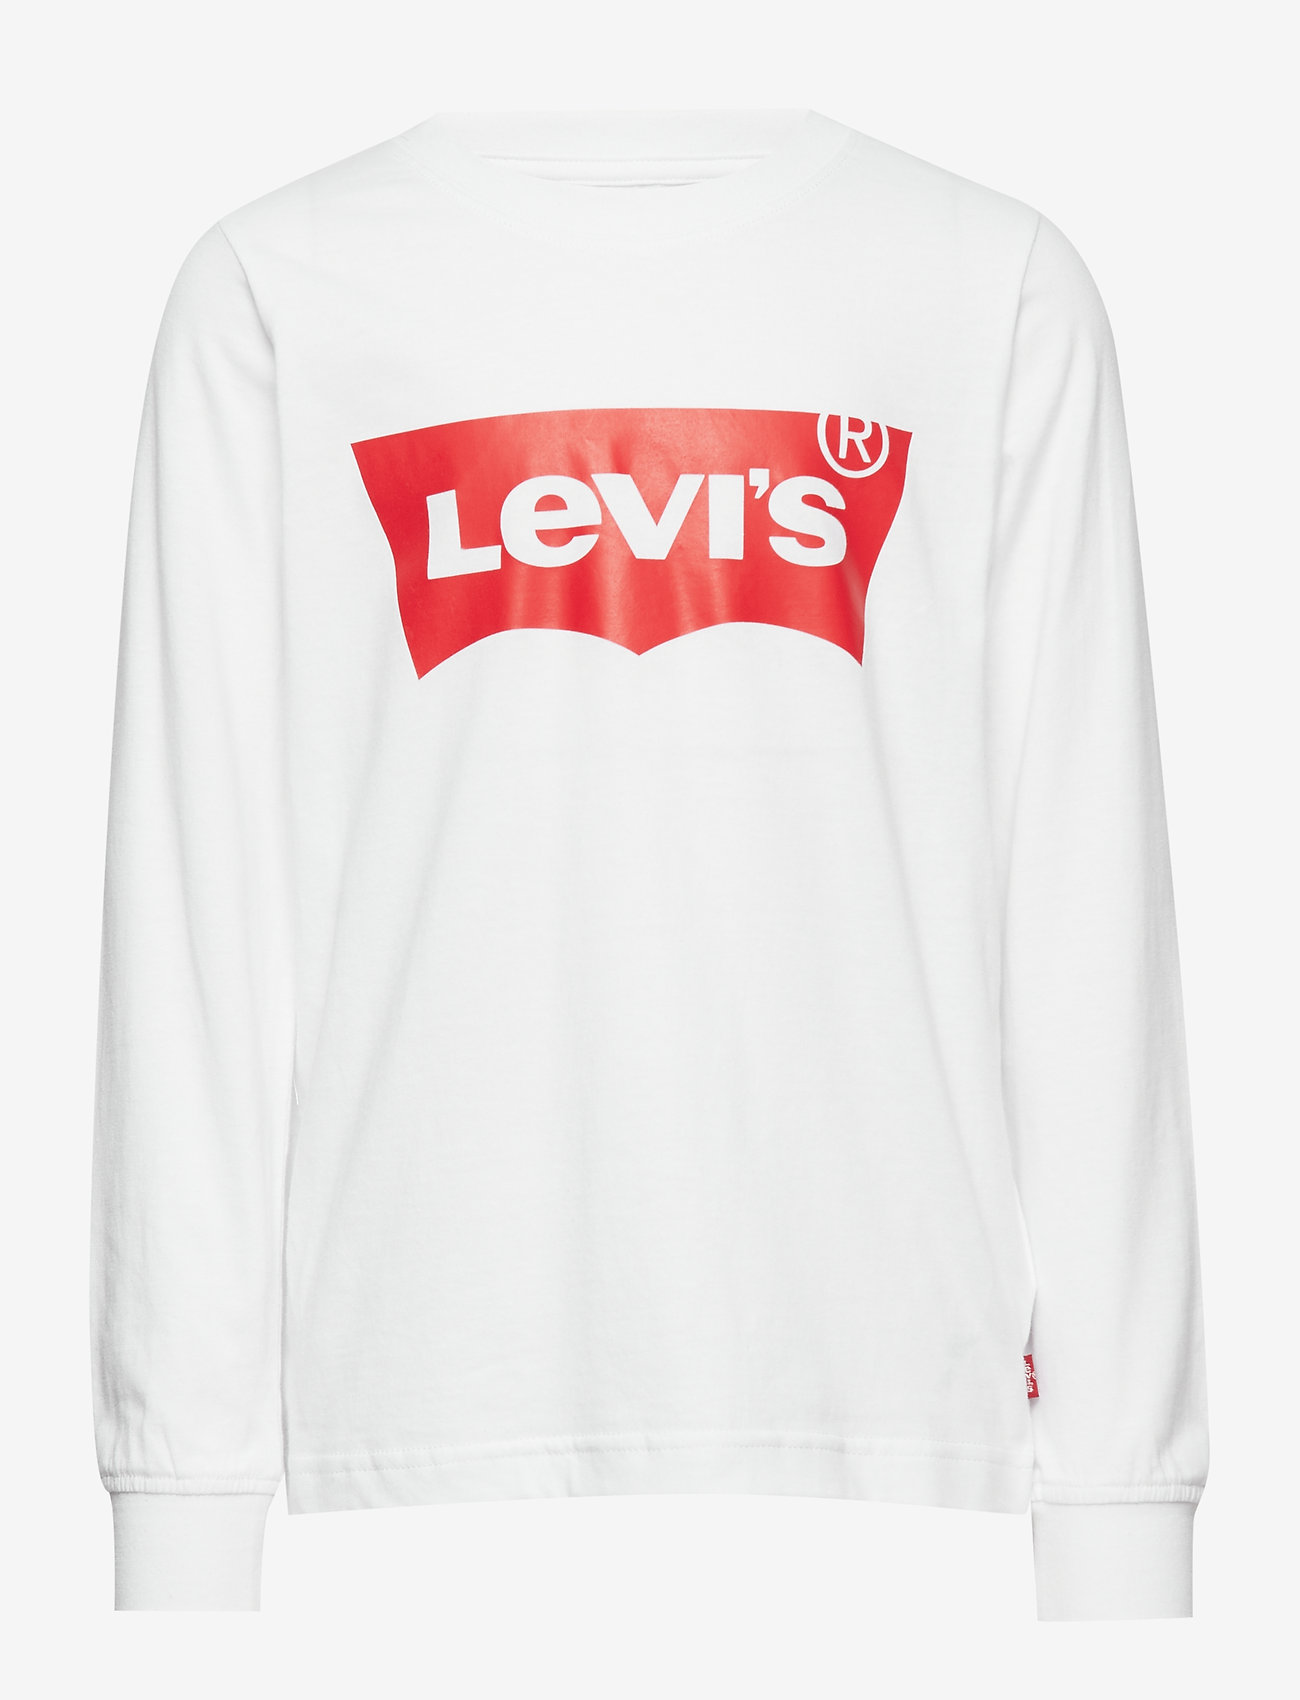 Levi's - Levi's® Long Sleeve Batwing Tee - long-sleeved t-shirts - transparent - 0